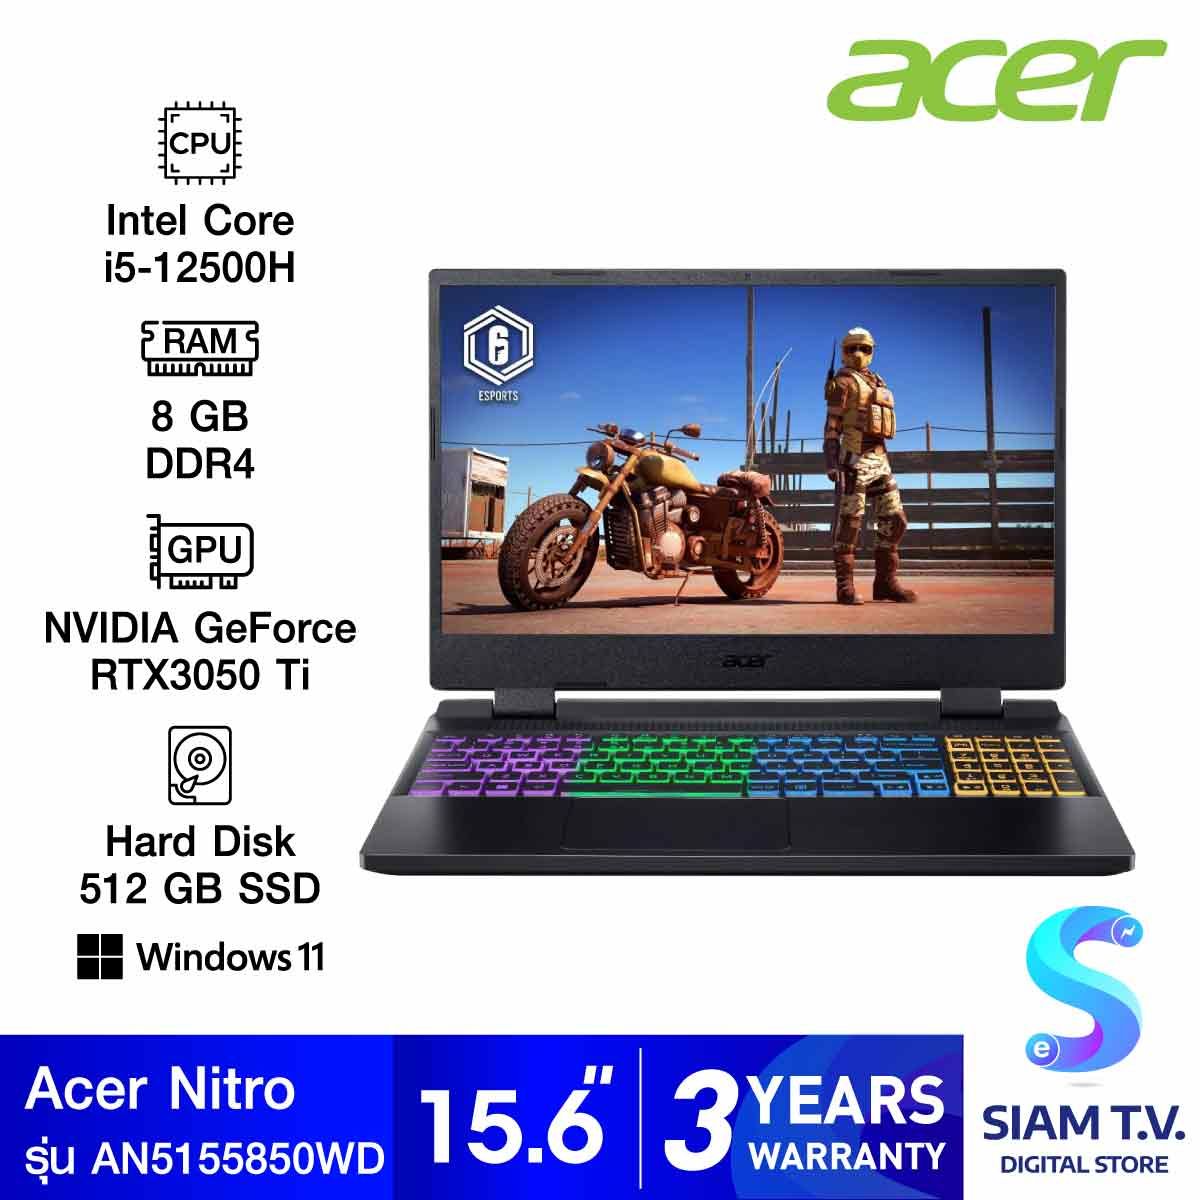 NOTEBOOK (โน้ตบุ๊ค) ACER NITRO AN515-58-50WD NH.QFKST.004 (BLACK)